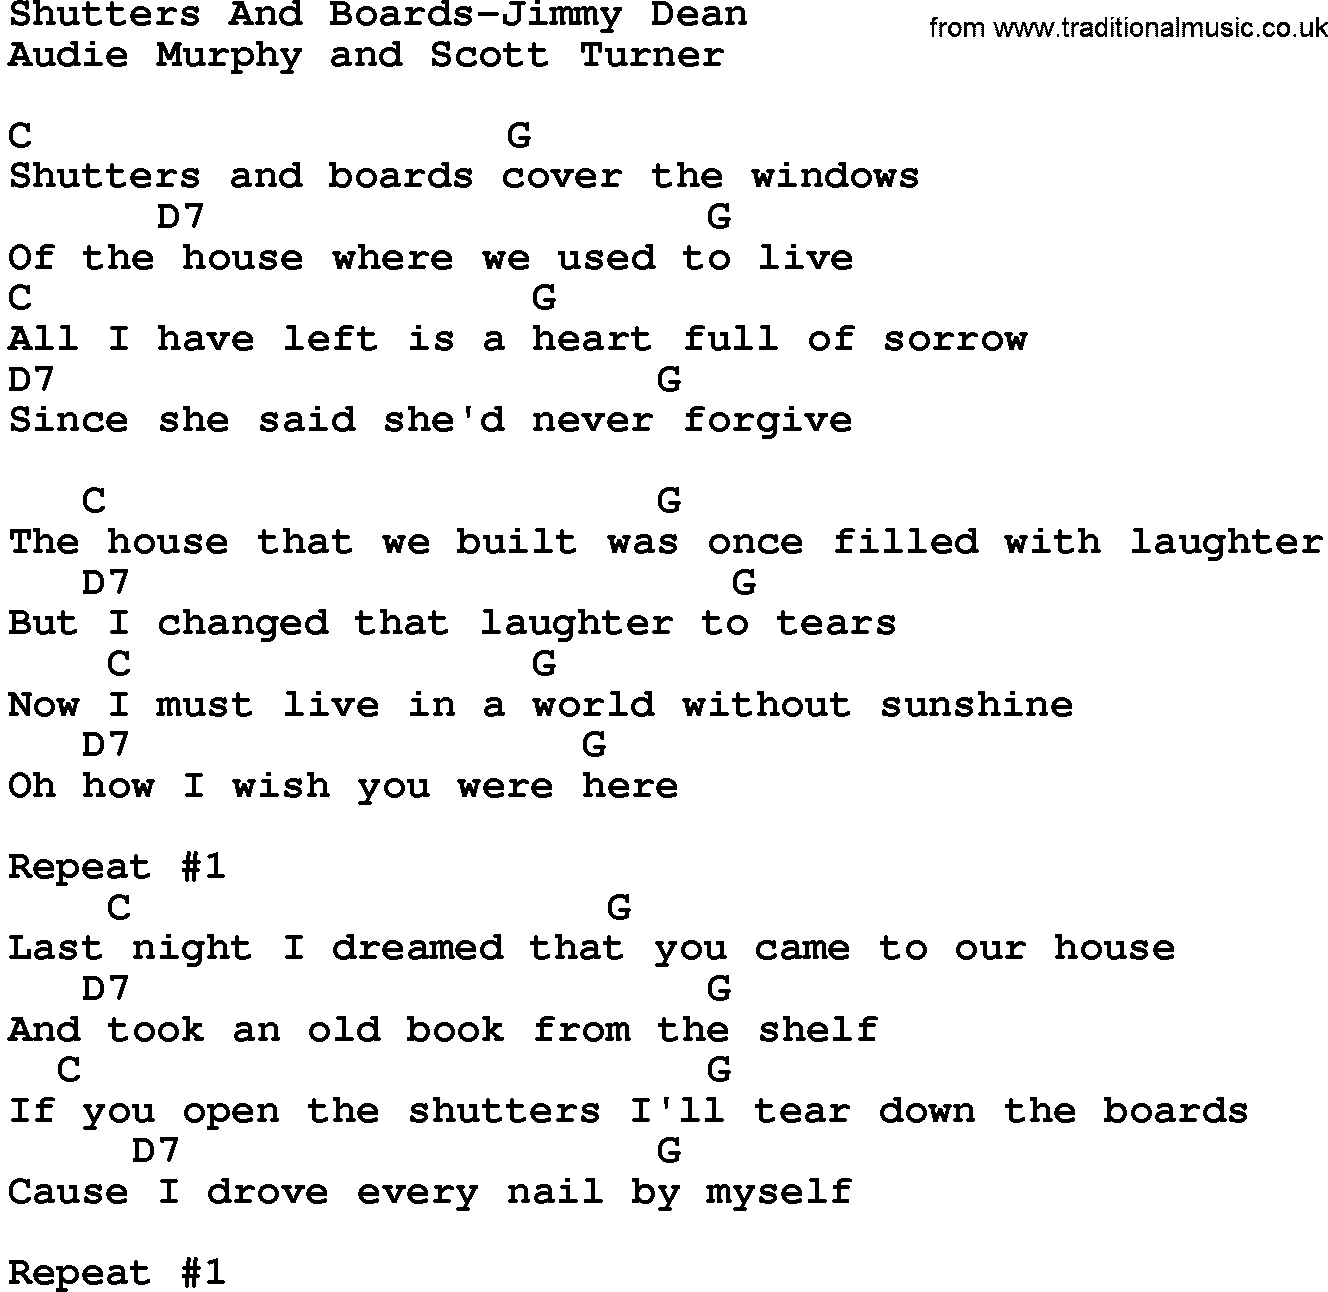 Country music song: Shutters And Boards-Jimmy Dean Written Audie Murphy And Scott Turner lyrics and chords